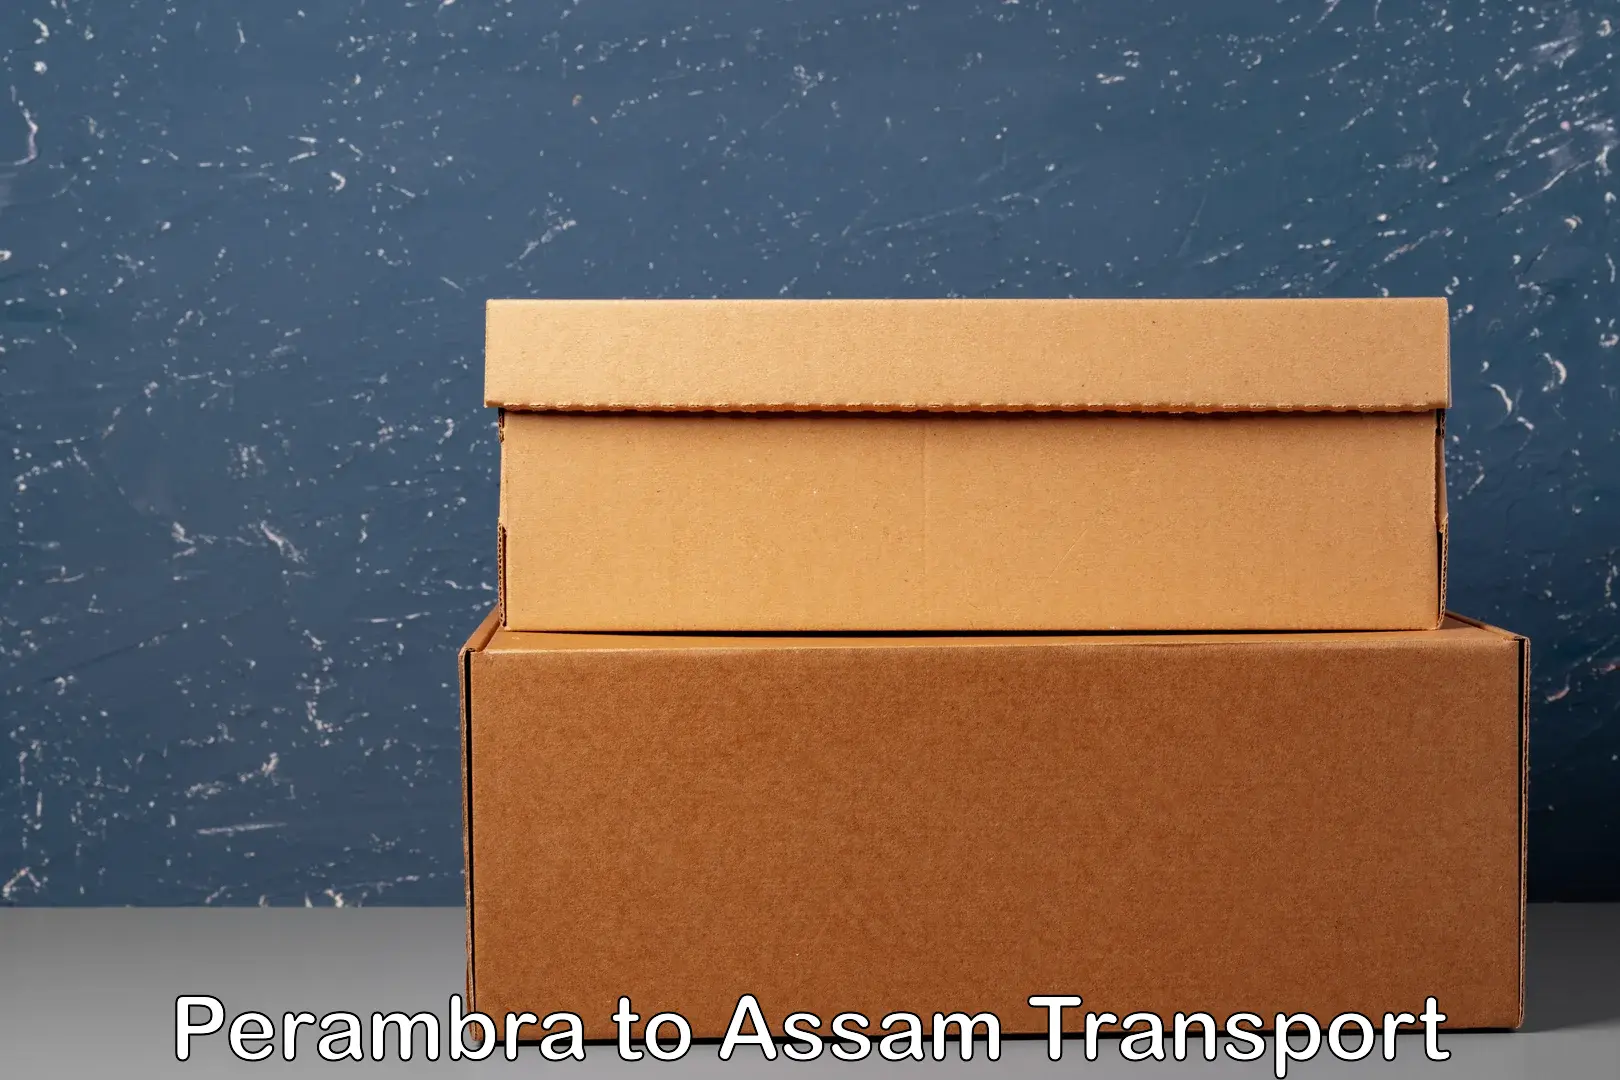 Sending bike to another city in Perambra to Assam